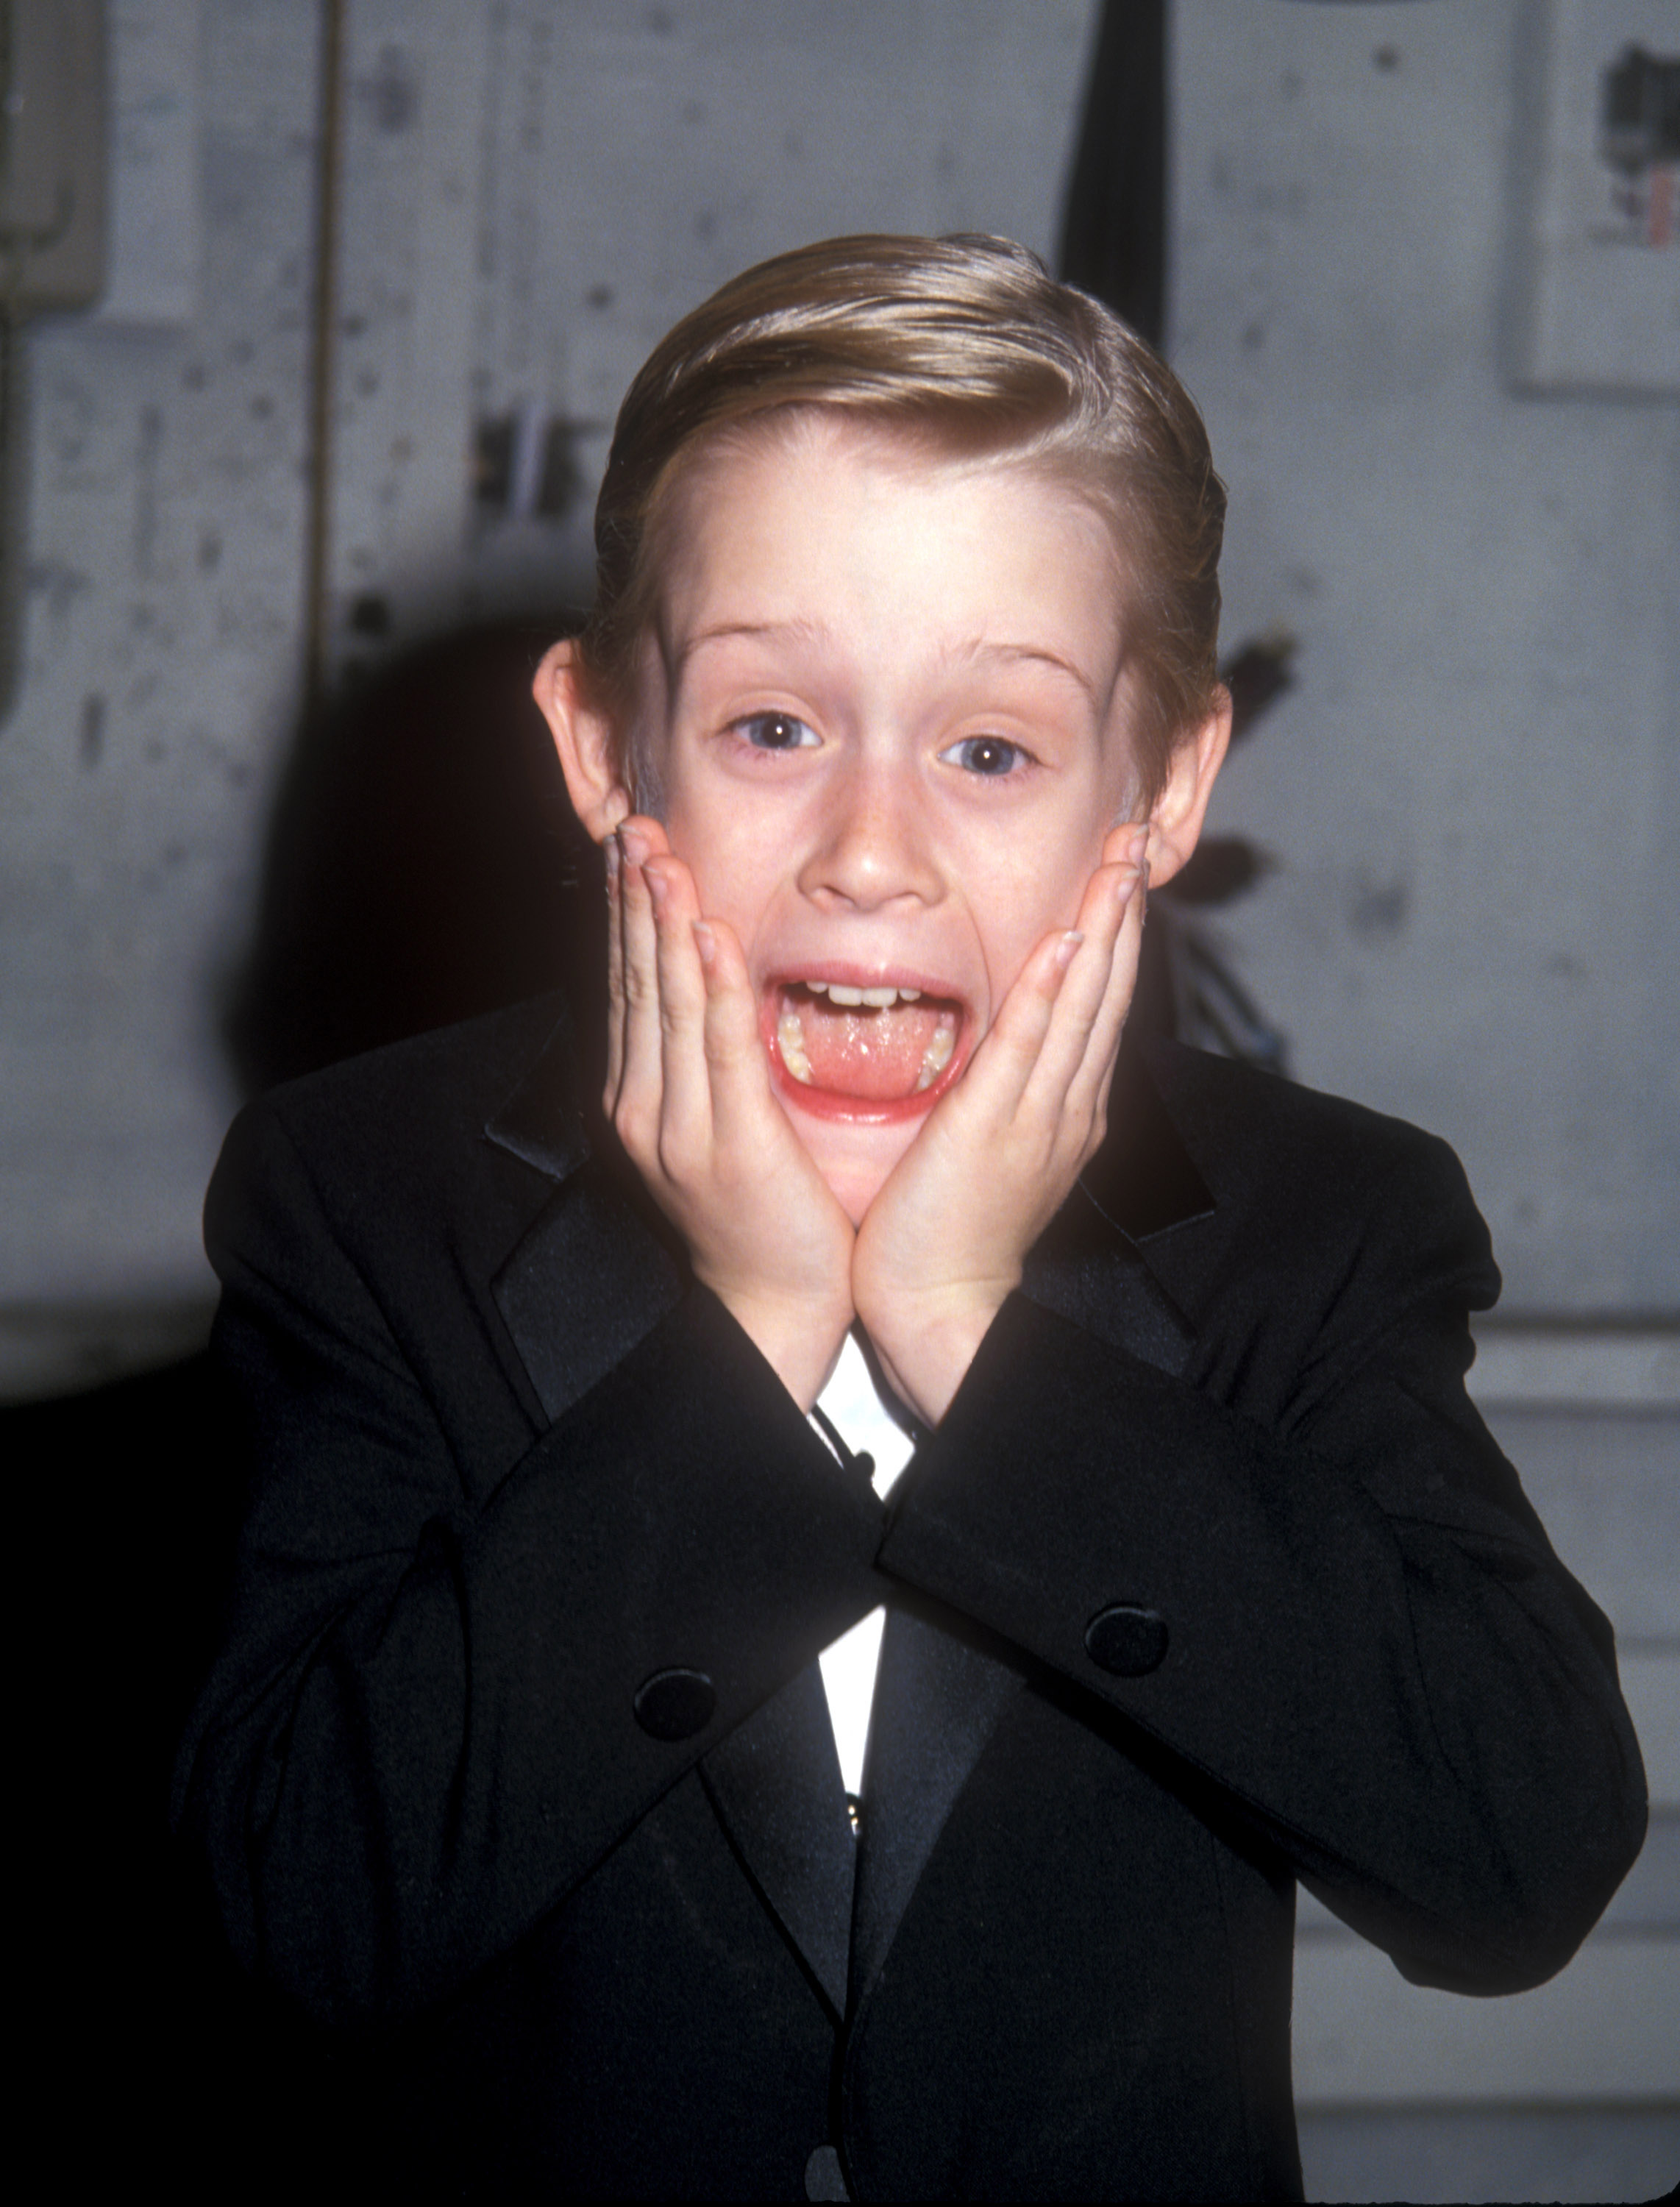 Macaulay Culkin at the American Comedy Awards at the Shrine Auditorium in Los Angeles, California in 1991 | Source: Getty Images